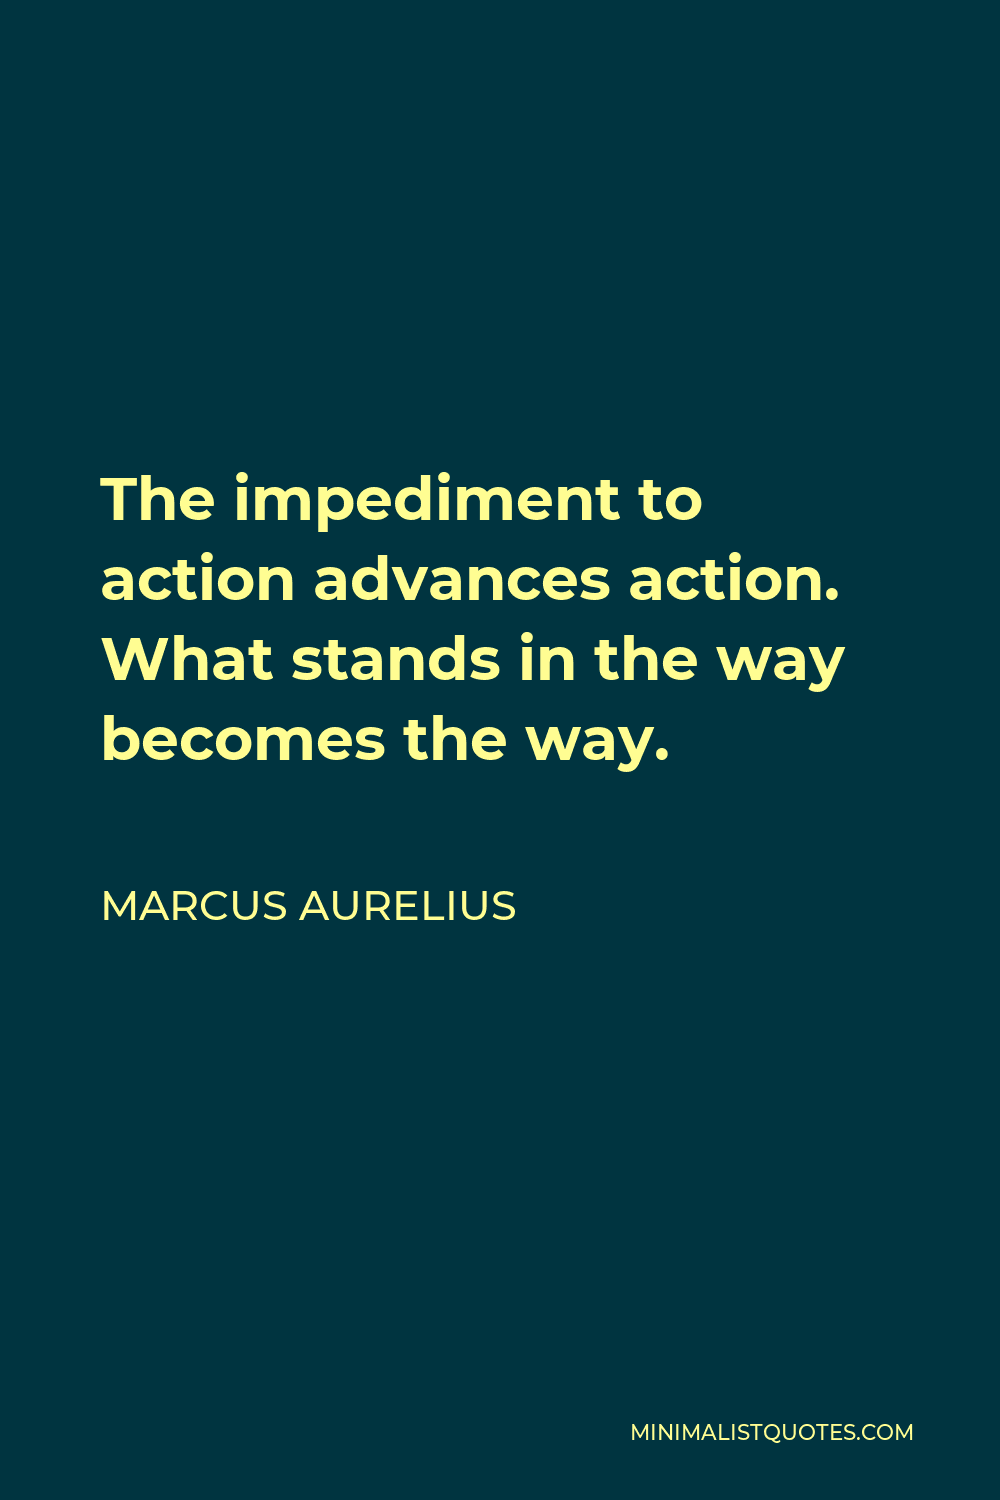 Marcus Aurelius Quote - The impediment to action advances action. What stands in the way becomes the way.